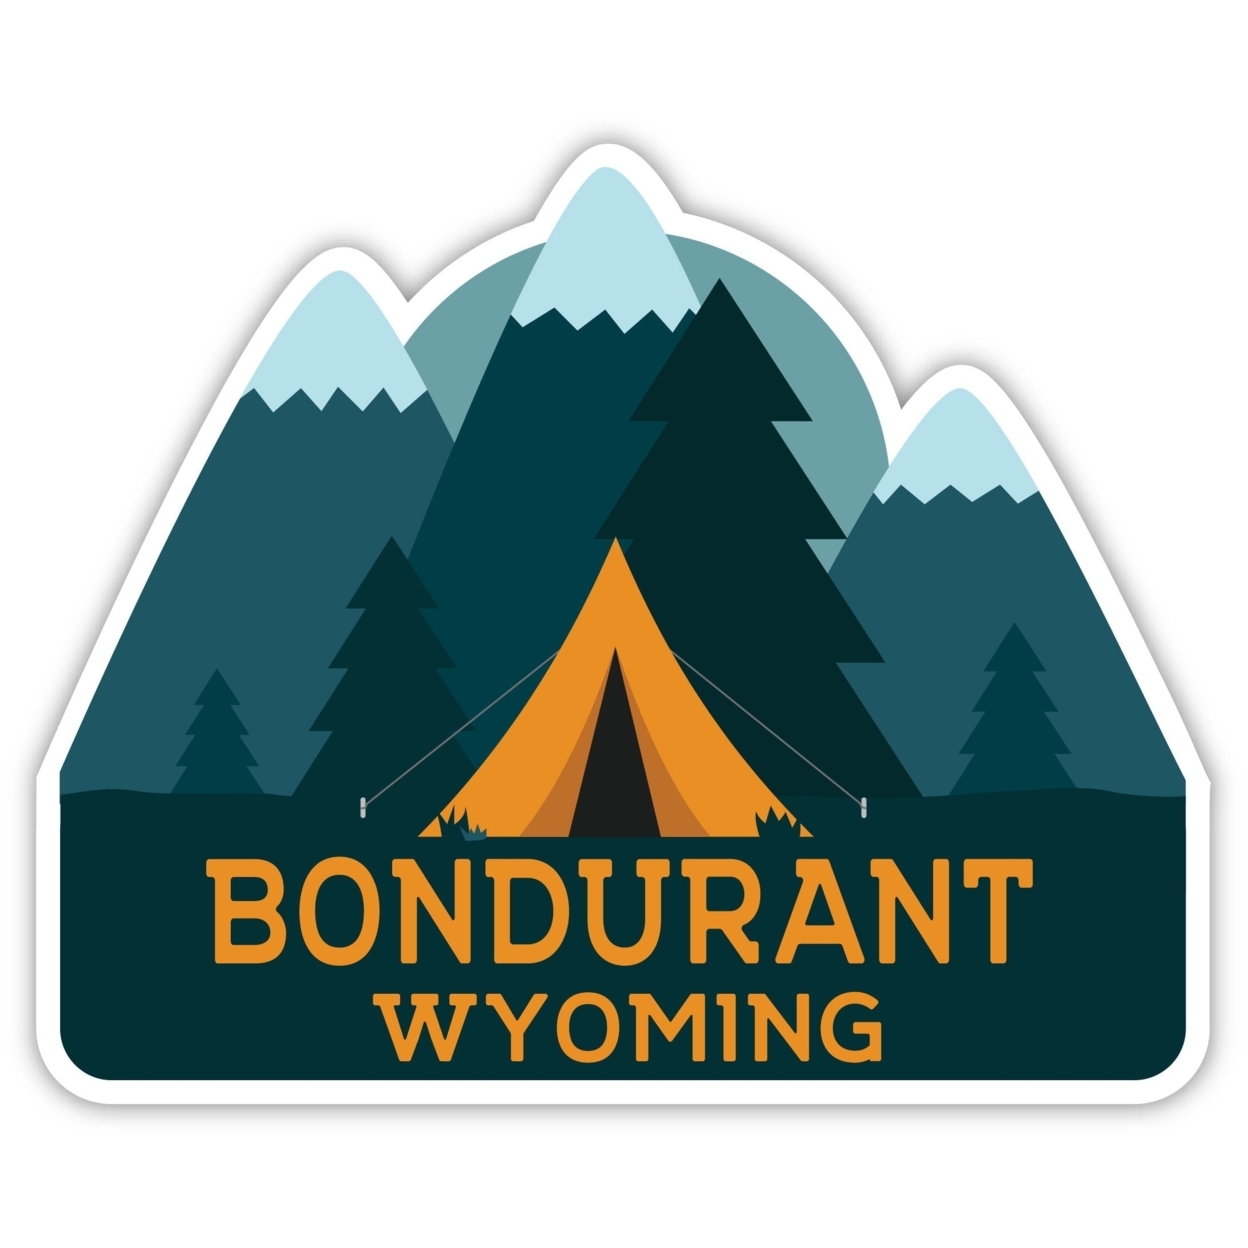 Bondurant Wyoming Souvenir Decorative Stickers (Choose Theme And Size) - 4-Pack, 2-Inch, Tent